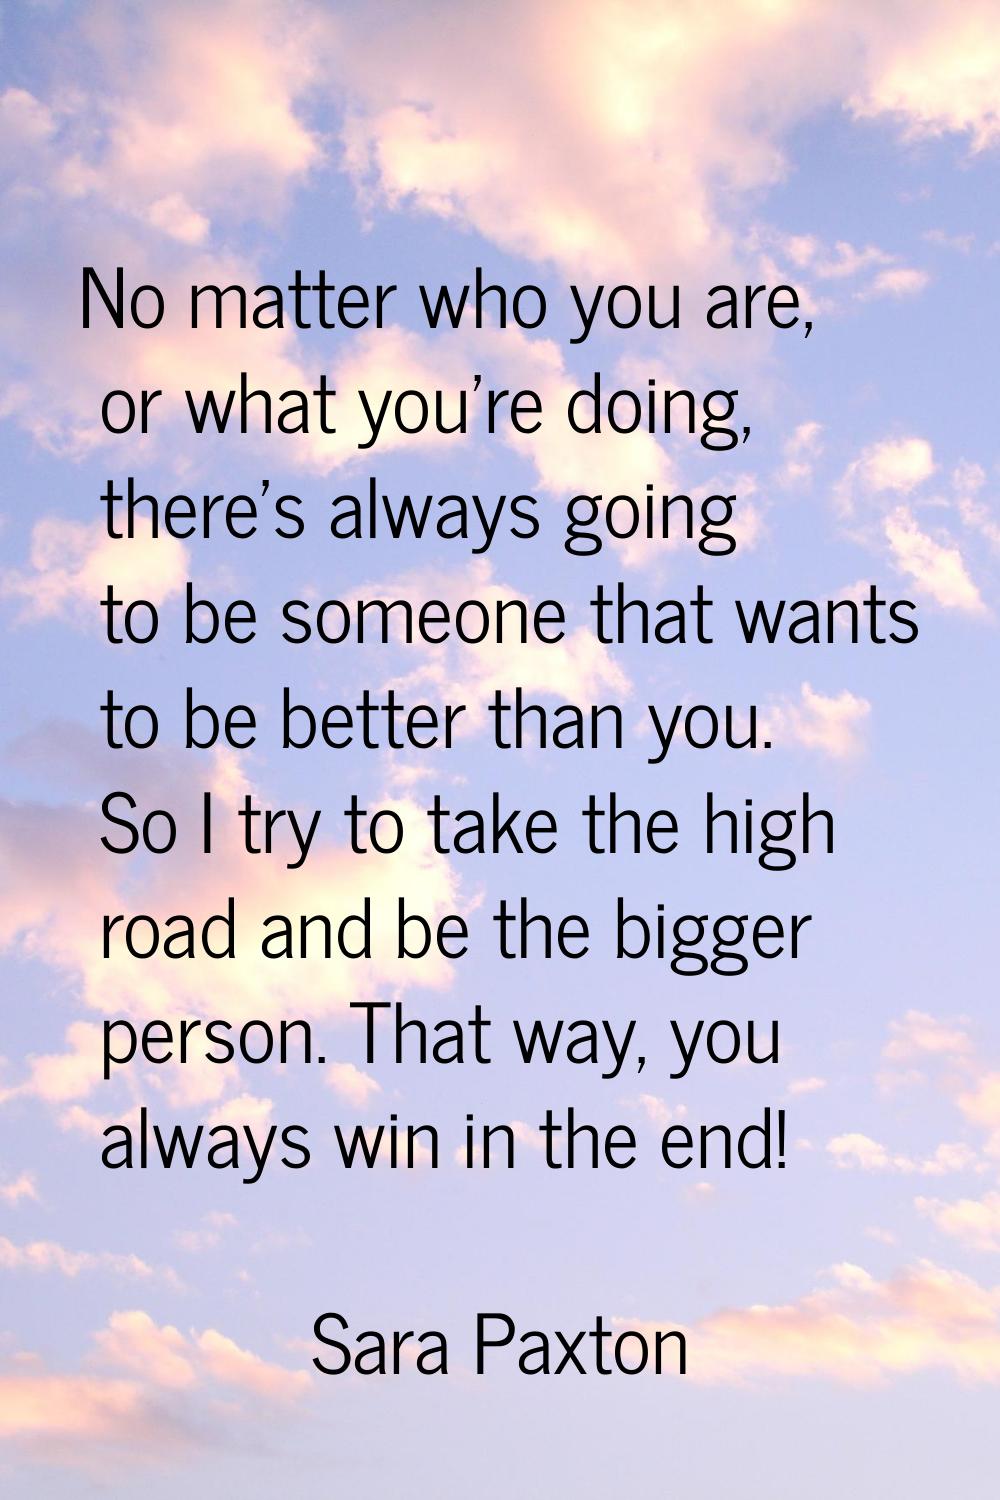 No matter who you are, or what you're doing, there's always going to be someone that wants to be be